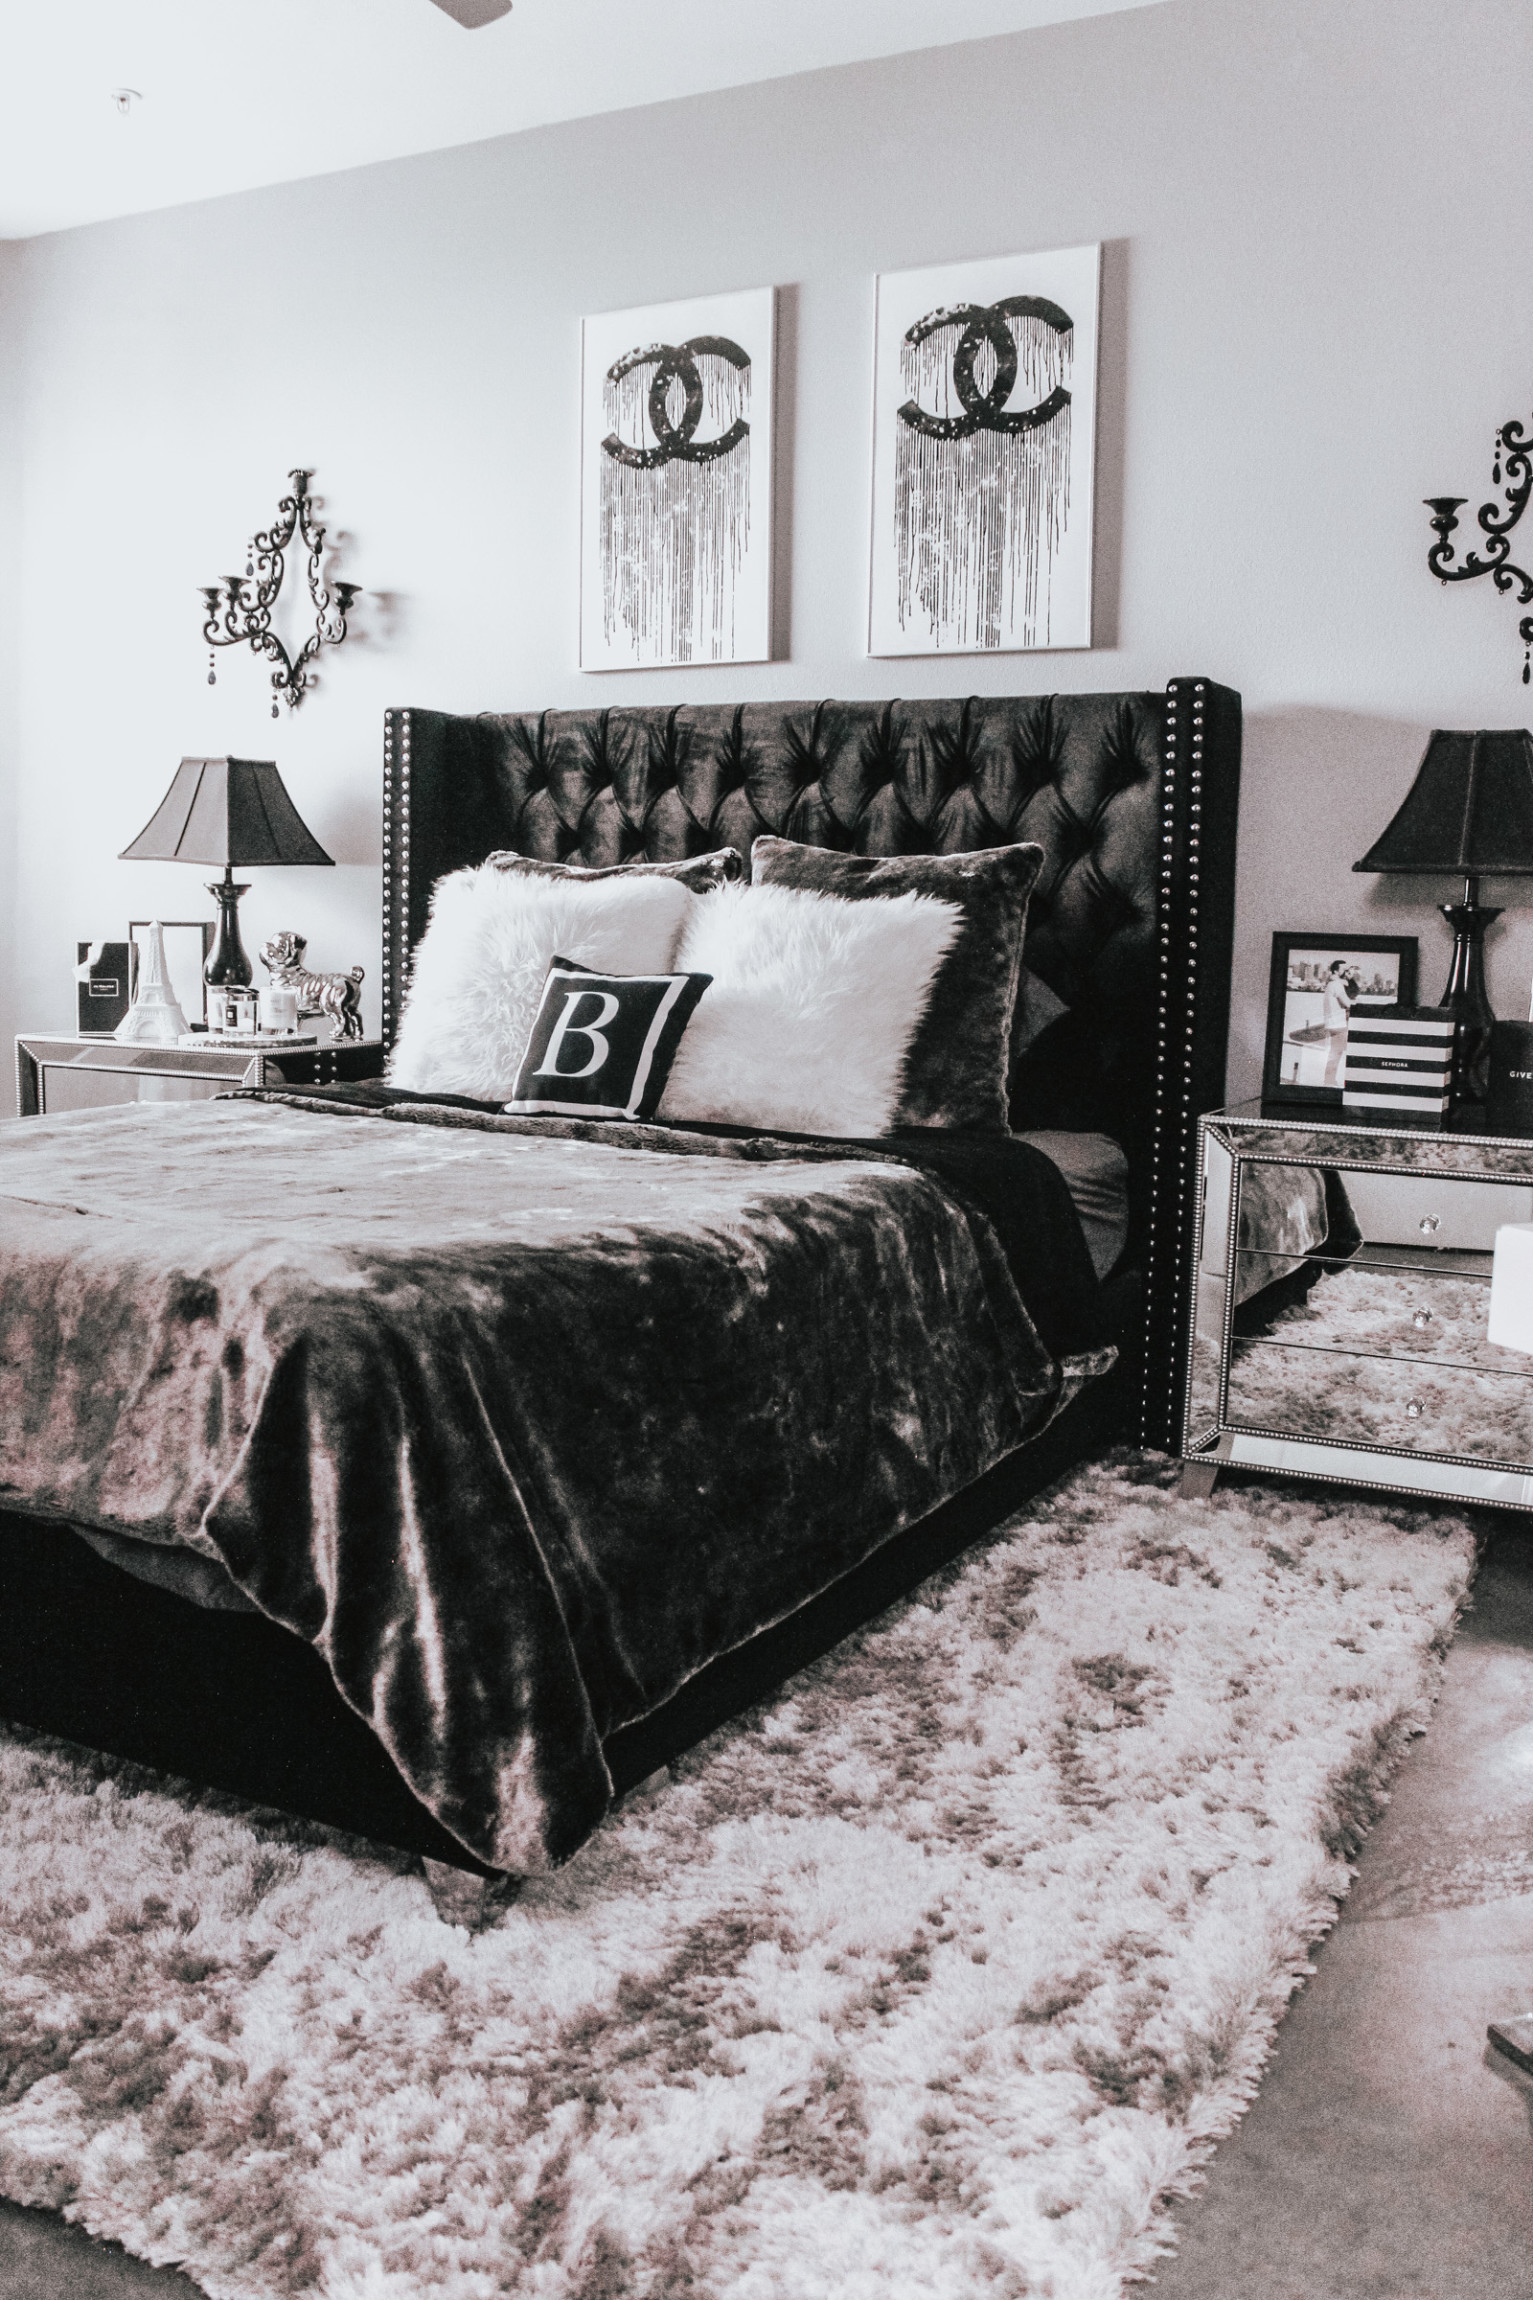 Chic Chanel Bedroom Decor | Chanel Prints | Black, White, & Grey Bedroom | Blondie in the City by Hayley Larue